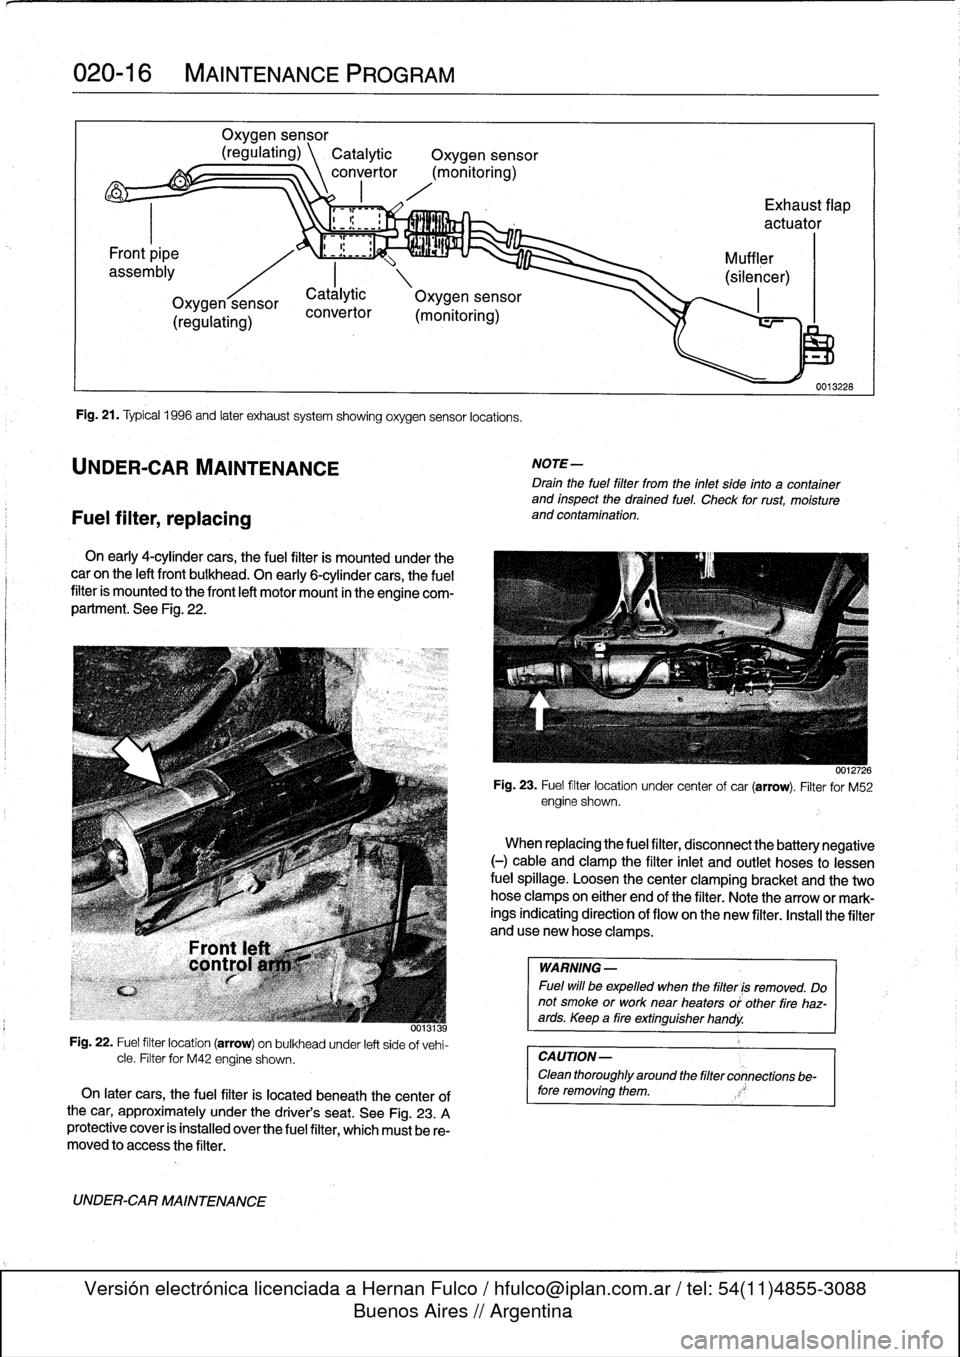 BMW 318i 1997 E36 Workshop Manual 
020-
1
6

	

MAINTENANCE
PROGRAM

Fuel
filter,
replacing

Oxygen
sensor

(regulating)
\
Catalytic

	

Oxygen
sensor
convertor
(monitoring)

Fig
.
21
.
Typical
1996
and
later
exhaust
system
showing
ox